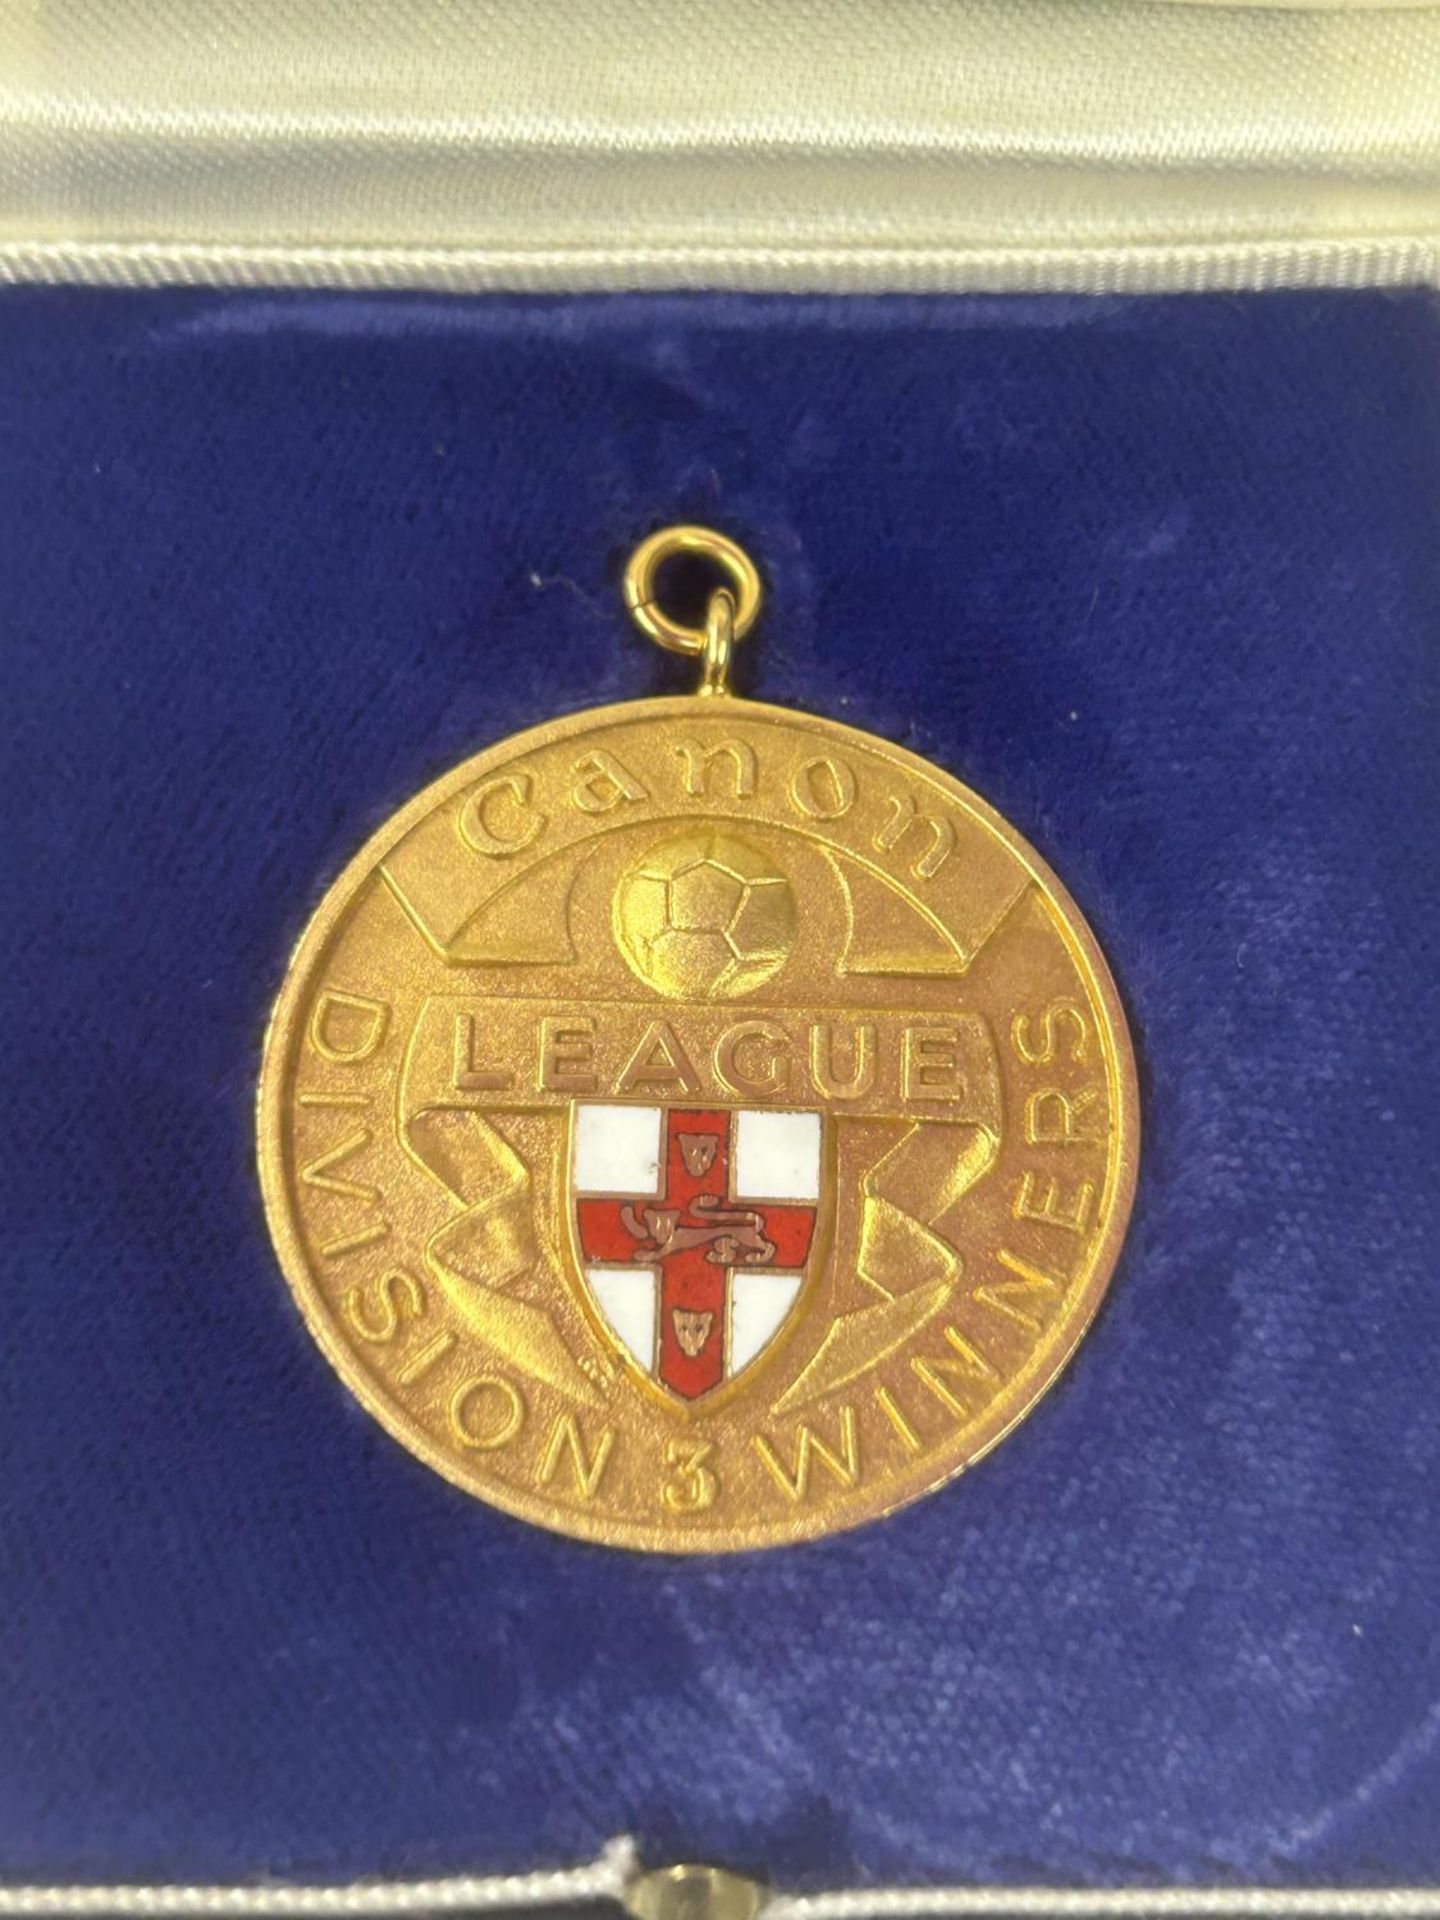 A HALLMARKED 9 CARAT GOLD & ENAMEL FOOTBALL LEAGUE CANON DIVISION 3 LEAGUE WINNERS MEDAL 1983-1984 - Image 2 of 5